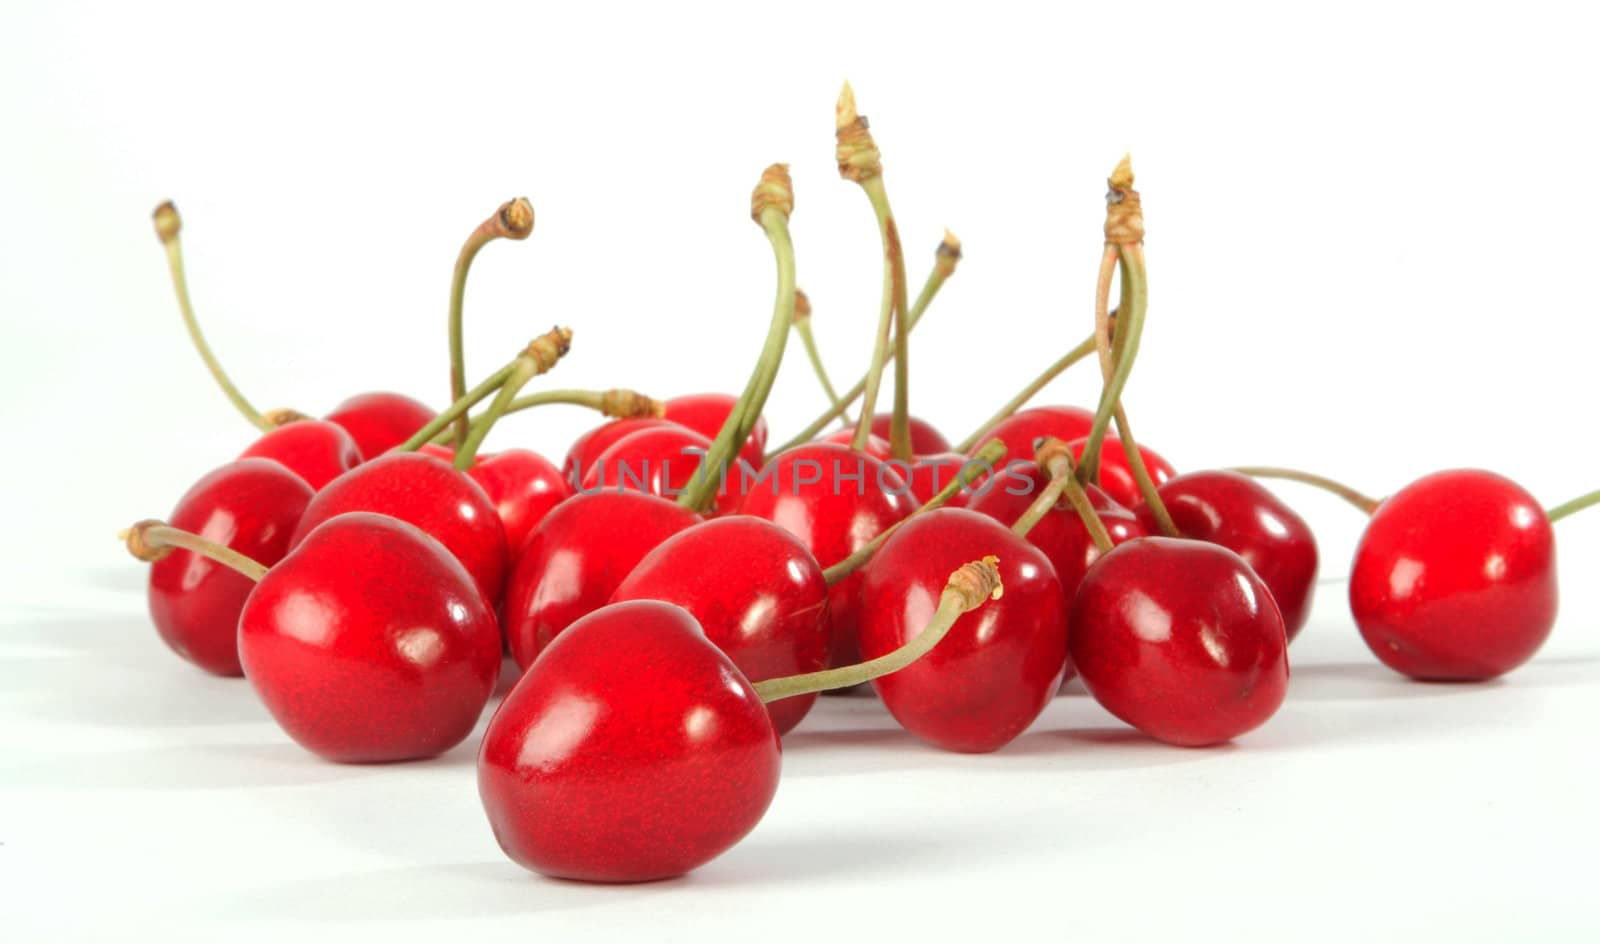 Ripe berries of a sweet cherry on a white sheet